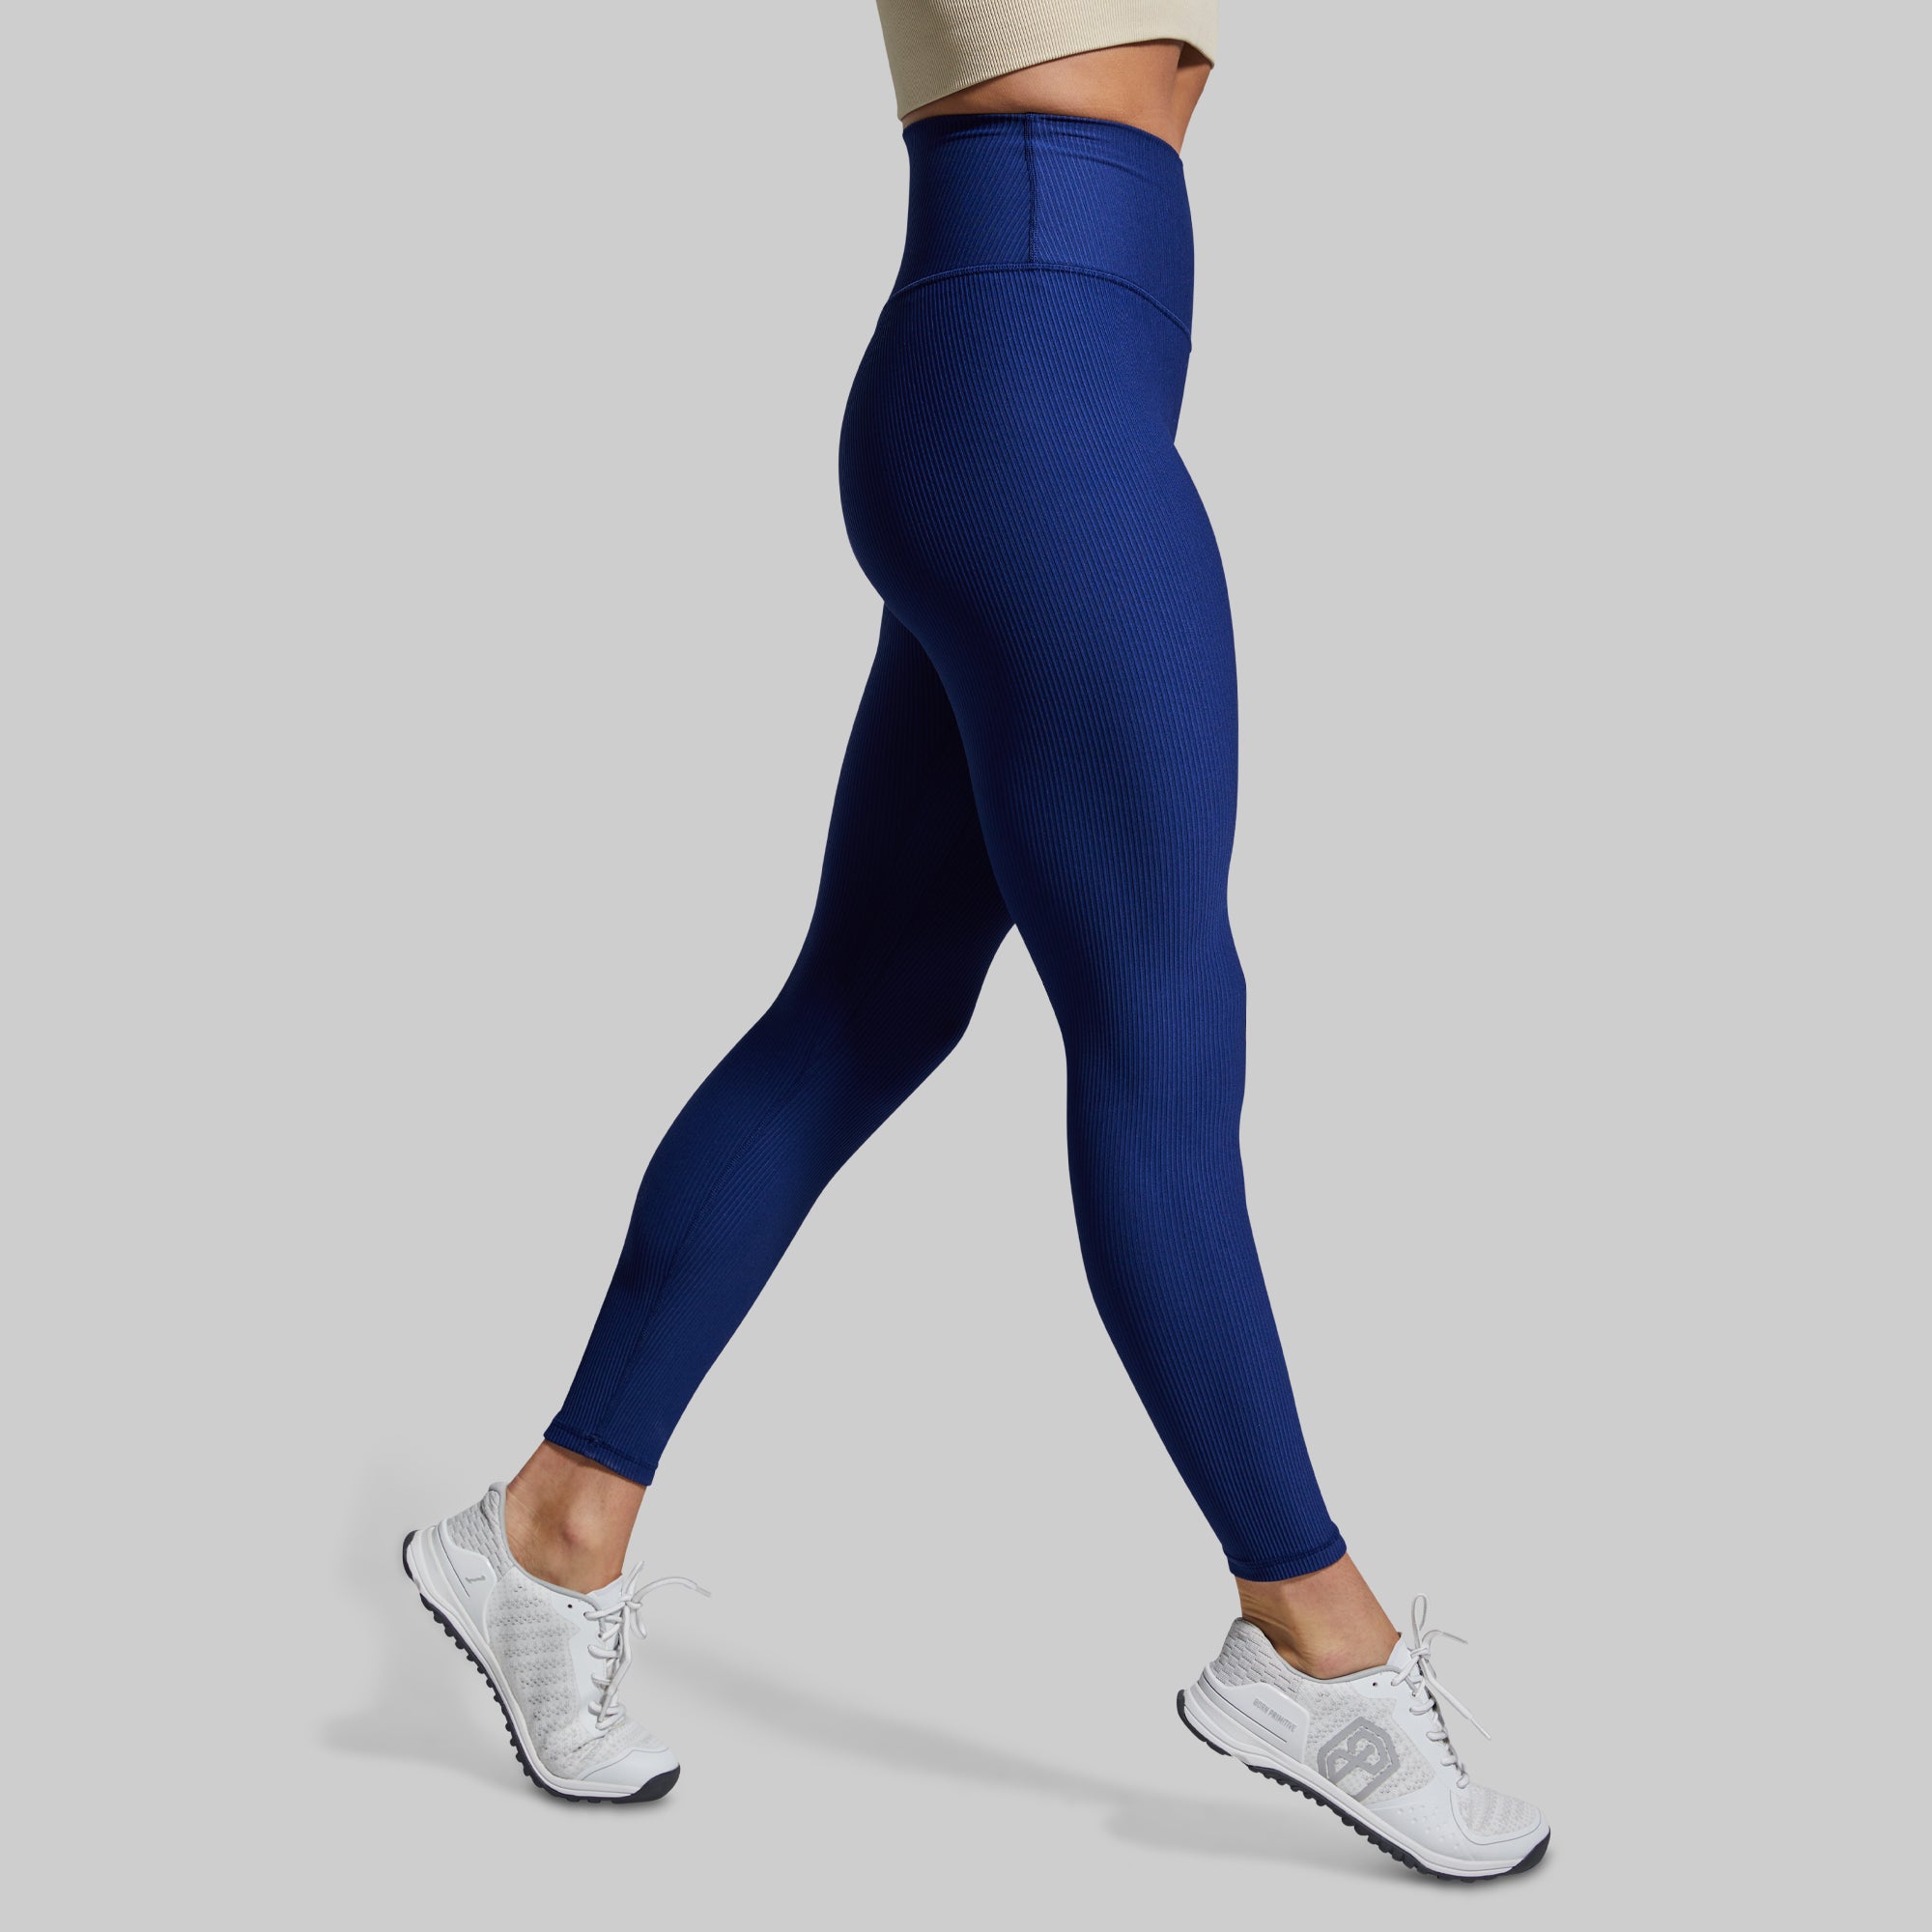 High Waisted Post Partum Tights - Ribbed Navy